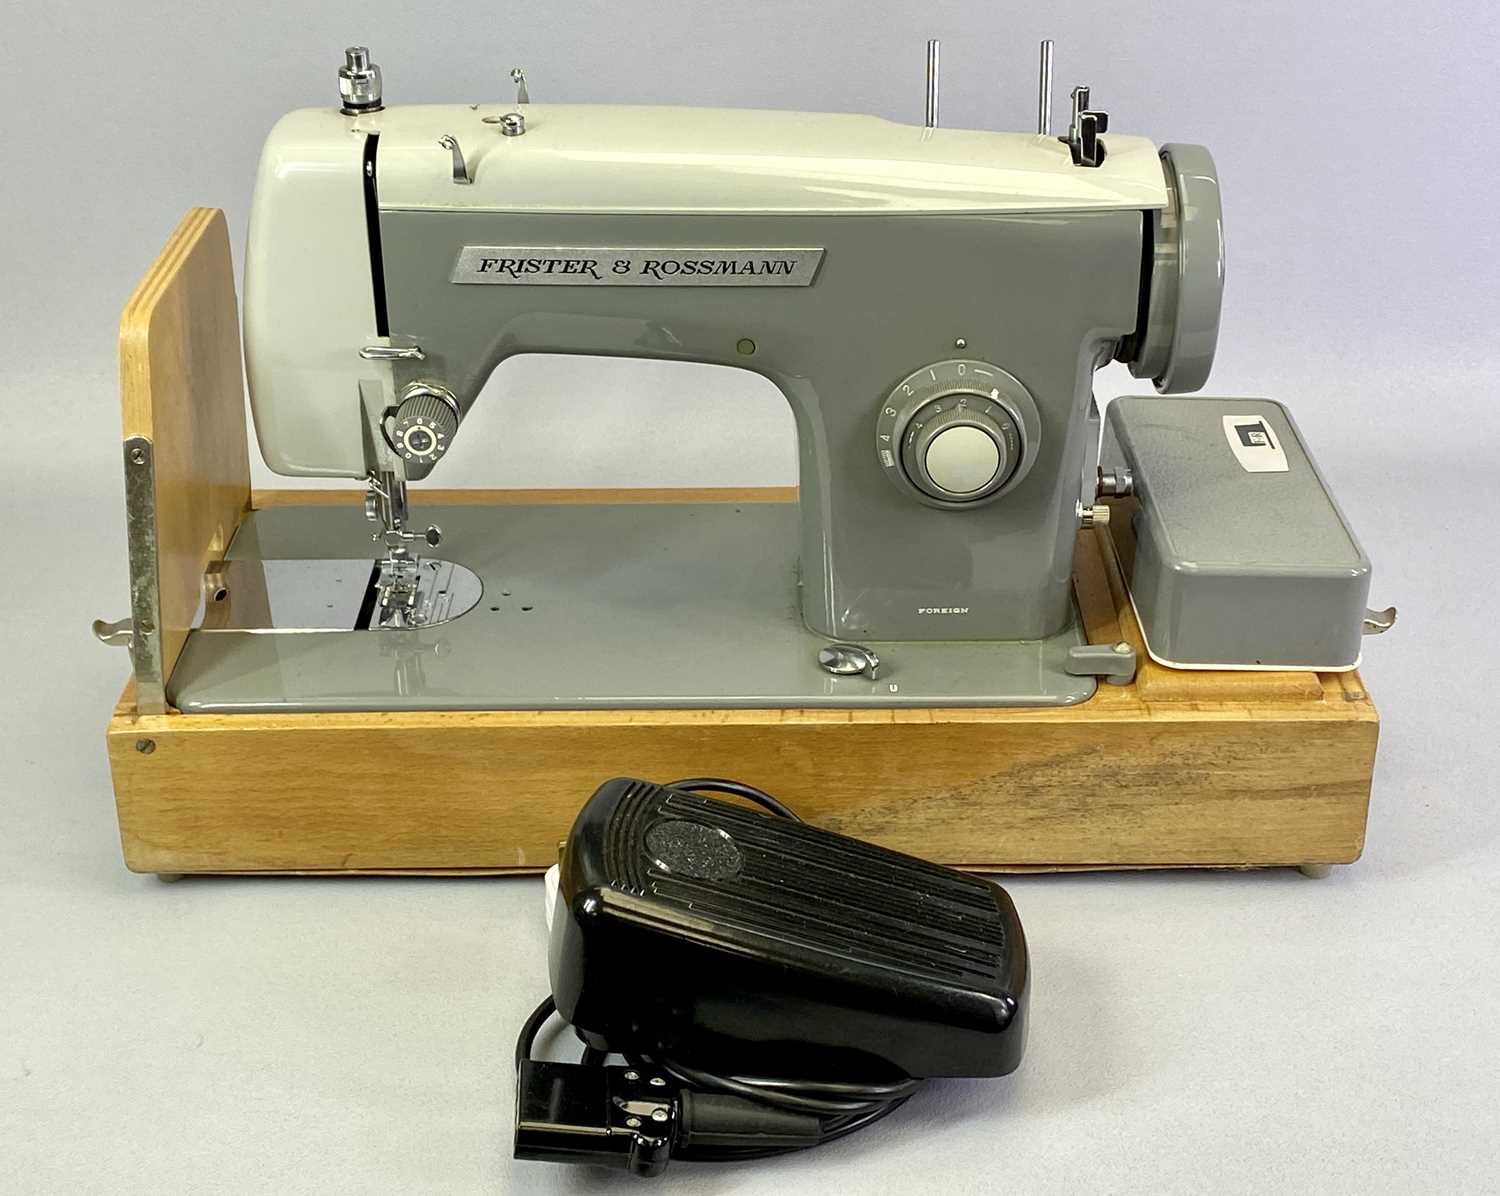 LORENZO VINTAGE PORTABLE ORGAN, Frister & Rossmann electric sewing machine in case with foot - Image 5 of 5